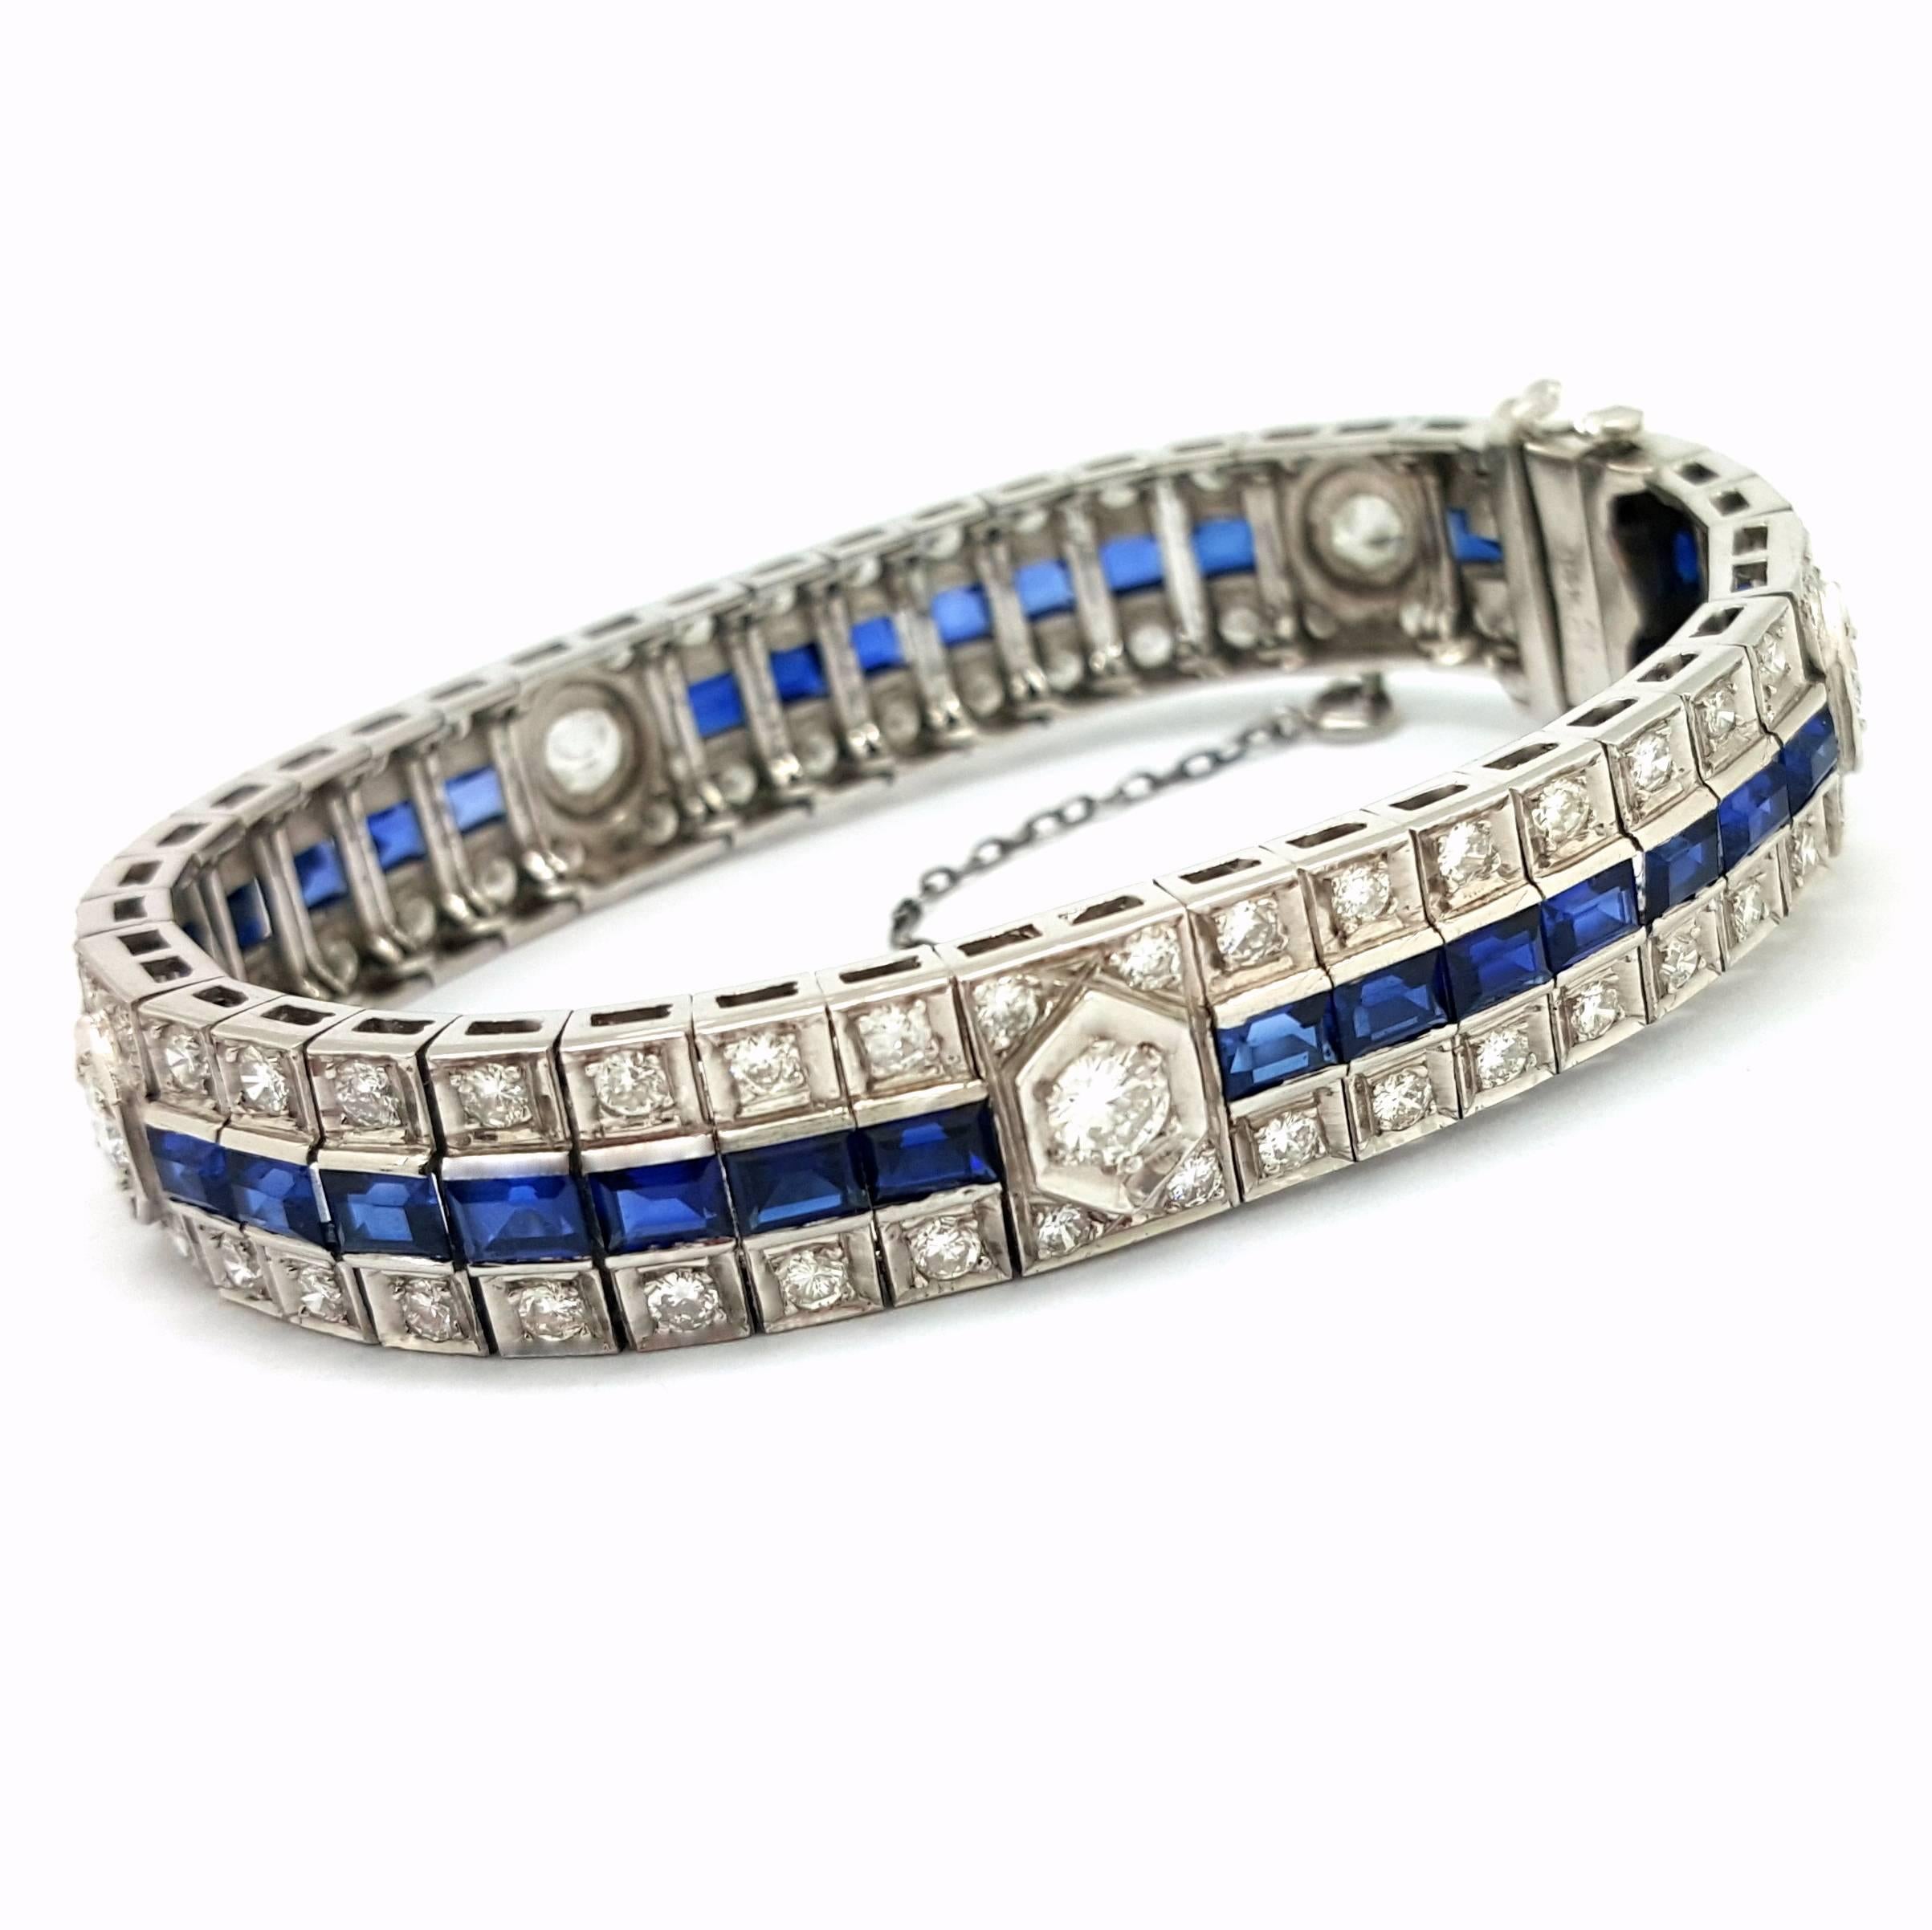 This unique bracelet is crafted in 14k white gold. It is set with 93 round, brilliant-cut diamonds that have a total weigh of 5.60 carats. The diamonds are graded G in color and VS1 in clarity. In addition, there are baguette-cut sapphire stones